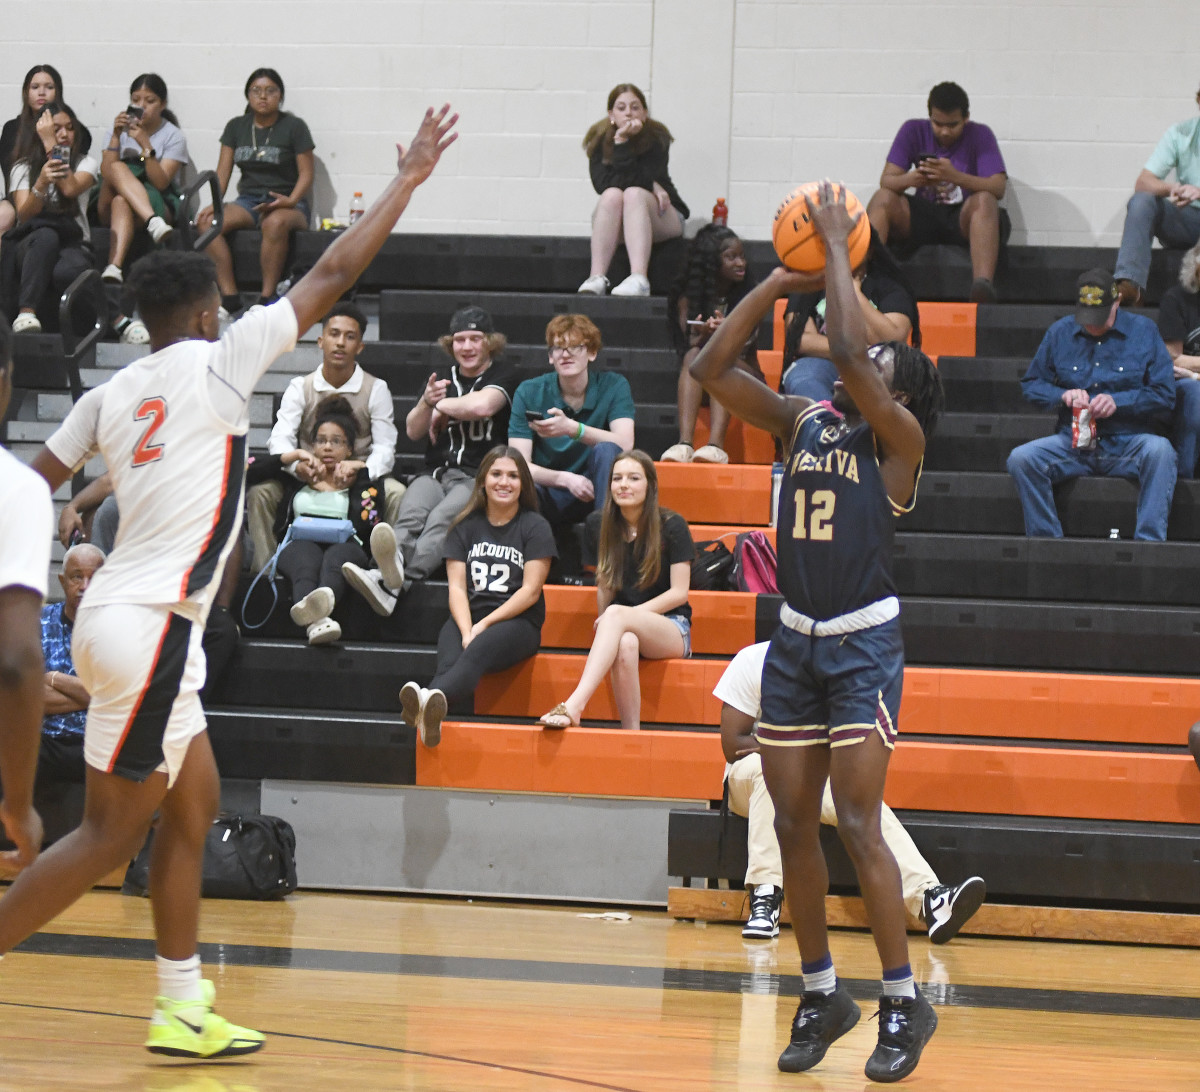 Wekiva's Abiah Charles shoots for a first-half 3-pointer against Leesburg's Camerin James. Charles scored a game-high 15 points, including the go-ahead 3-pointer, in the Mustangs' 45-42 victory. James had 13 points.